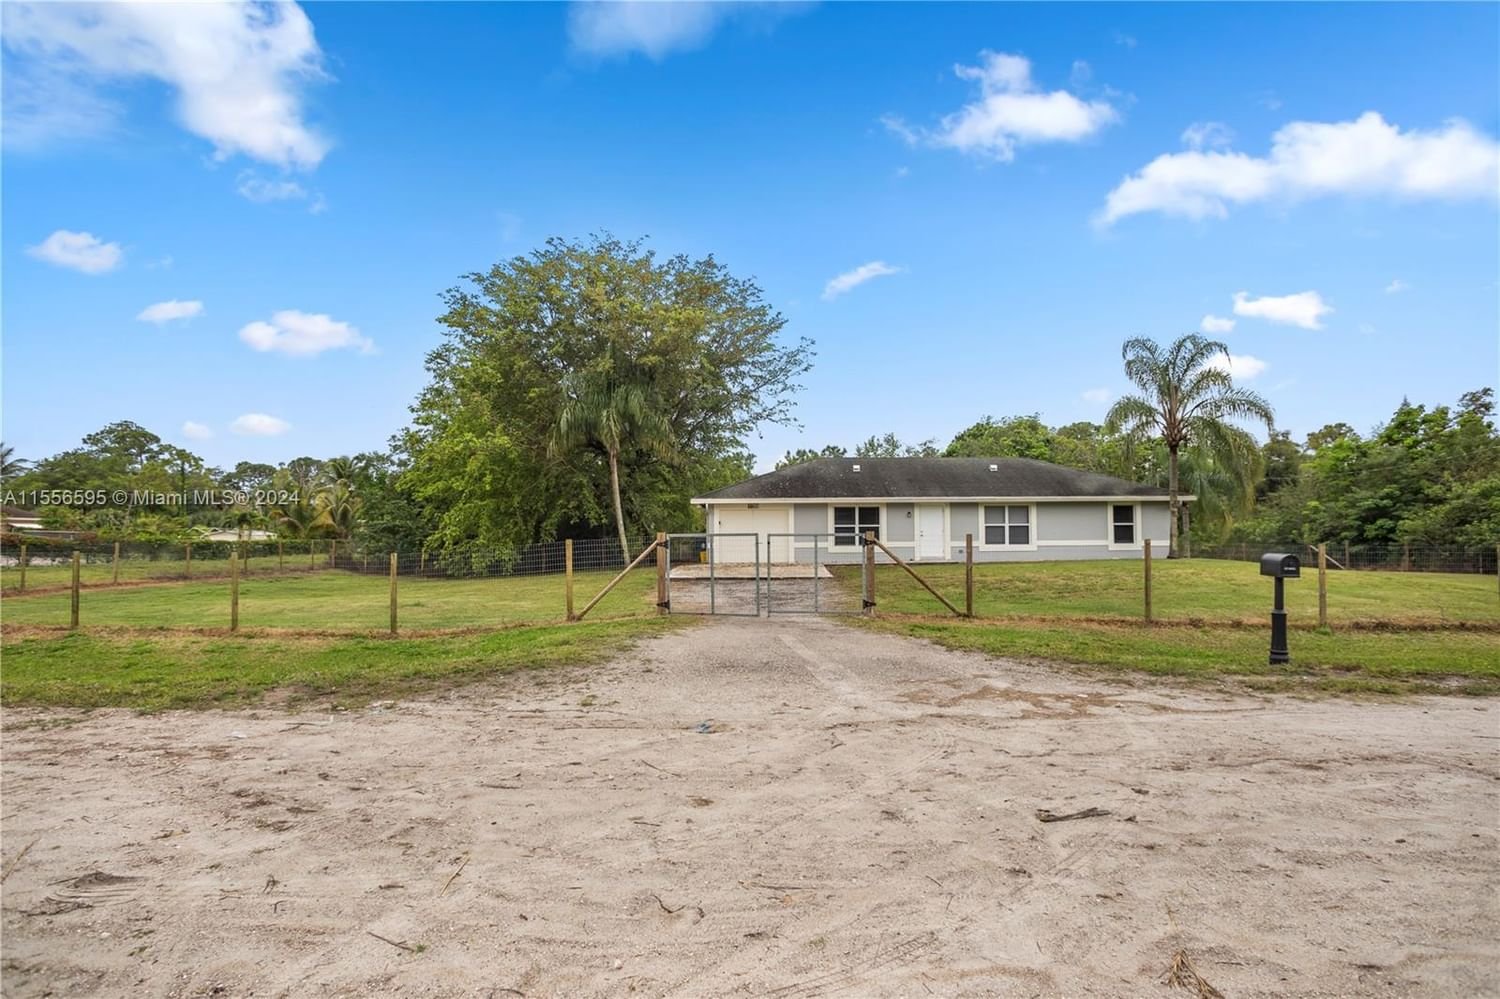 Real estate property located at 17288 48th Ct N, Palm Beach County, THE ACREAGE, Loxahatchee, FL